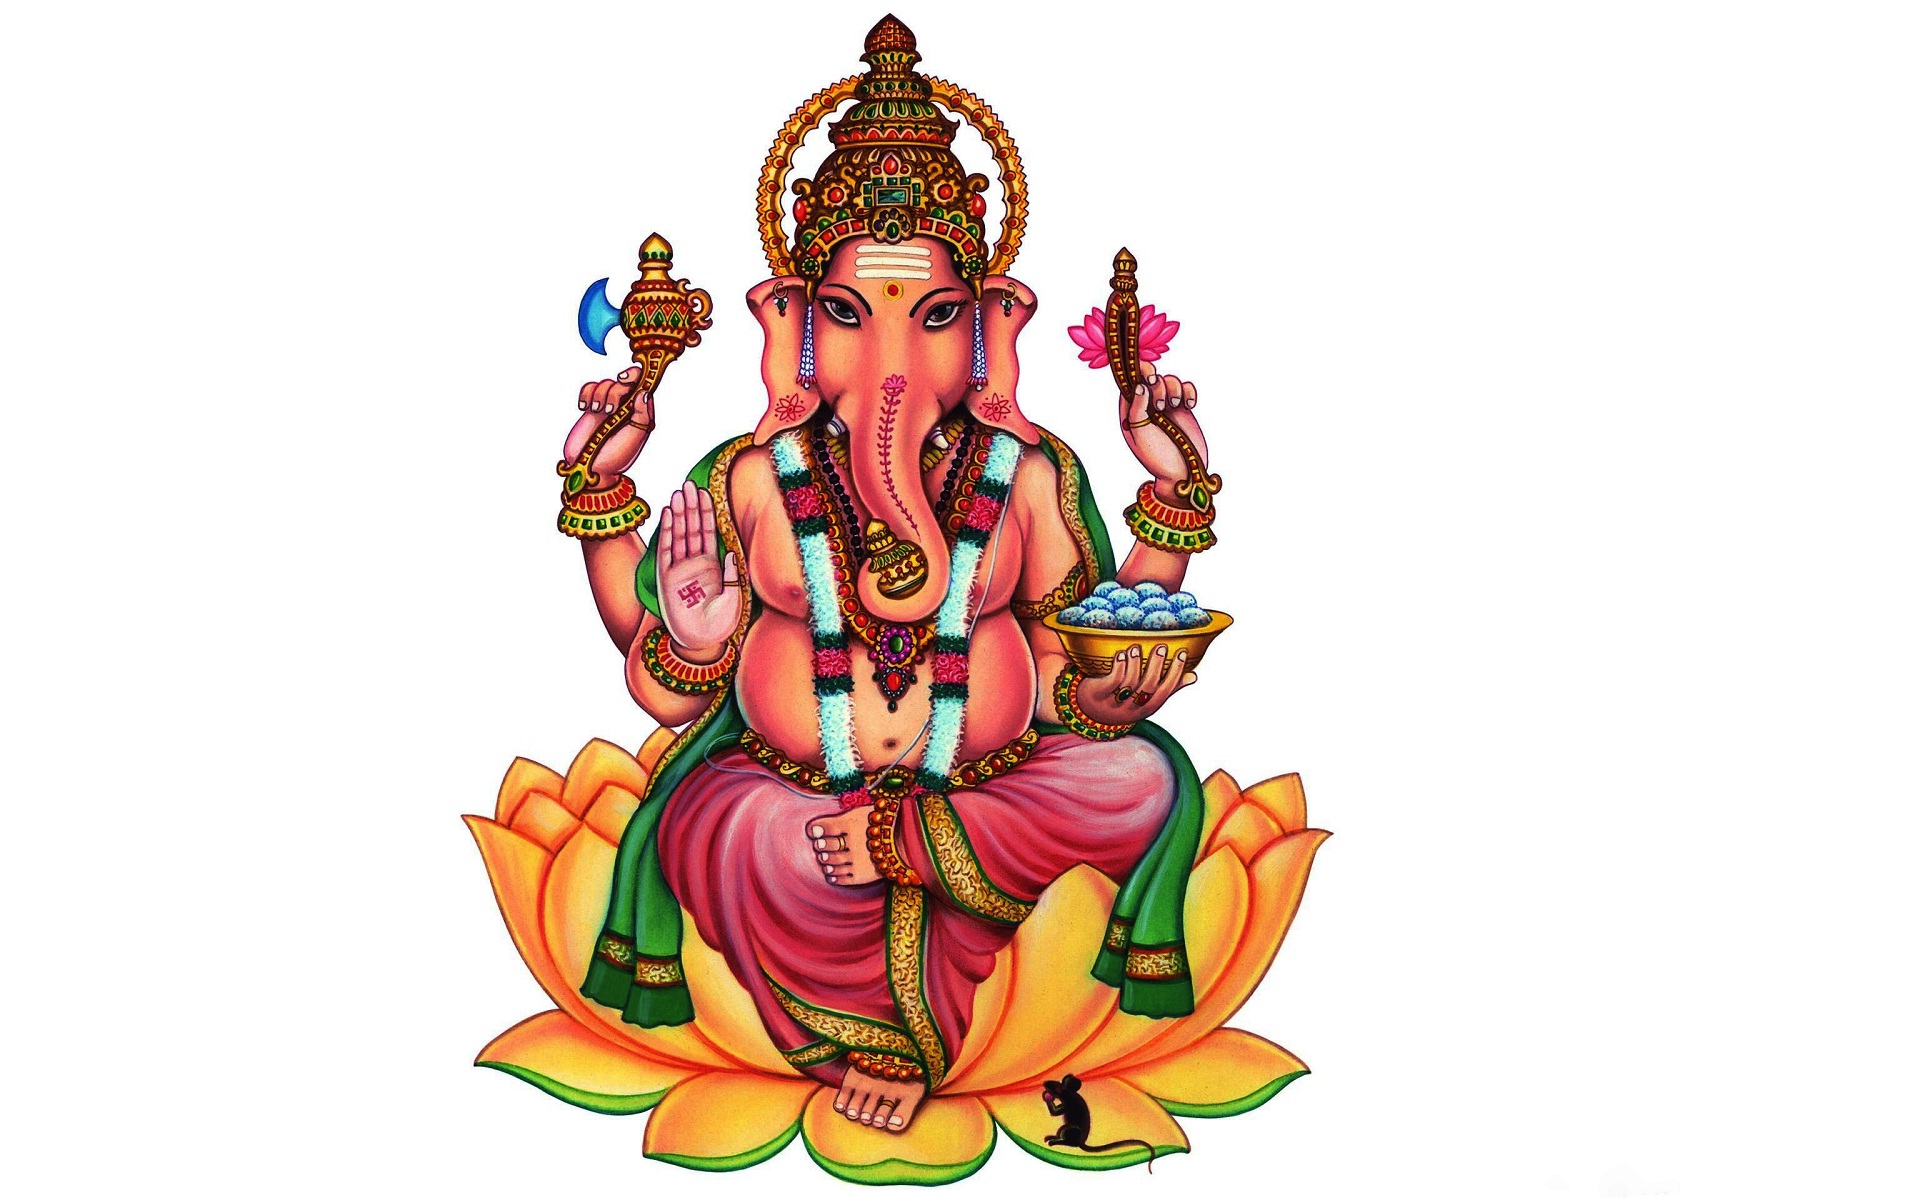 Ganesh clipart for mobile free download - ClipartFox